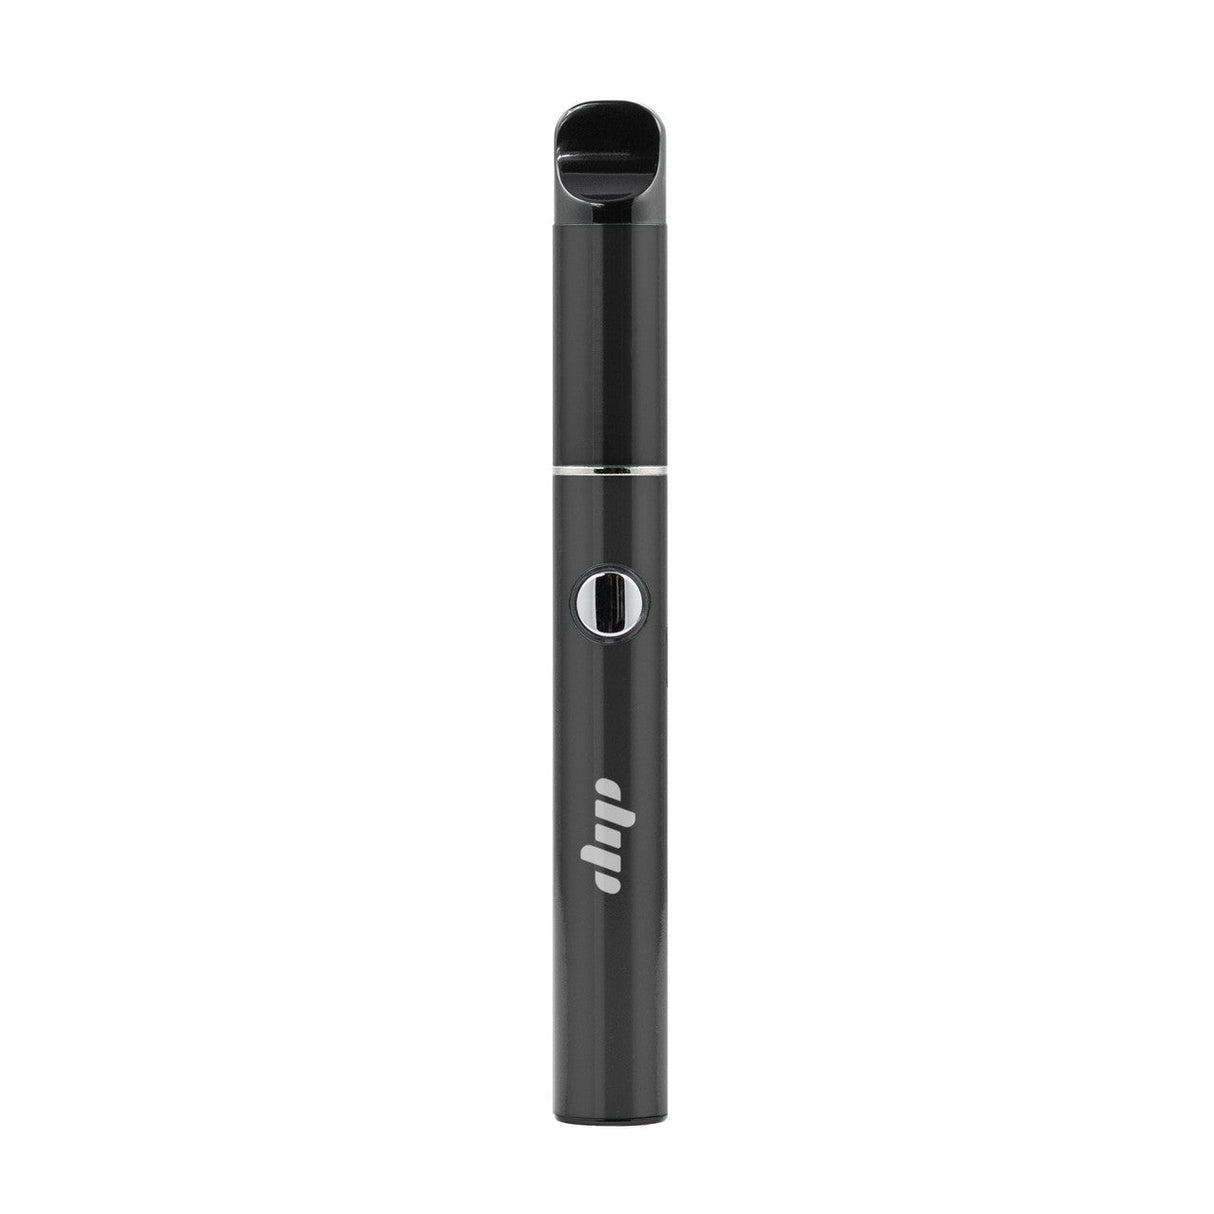 Dip Devices Lunar Vaporizer in Black - Compact Battery-Powered Concentrate Pen, Front View